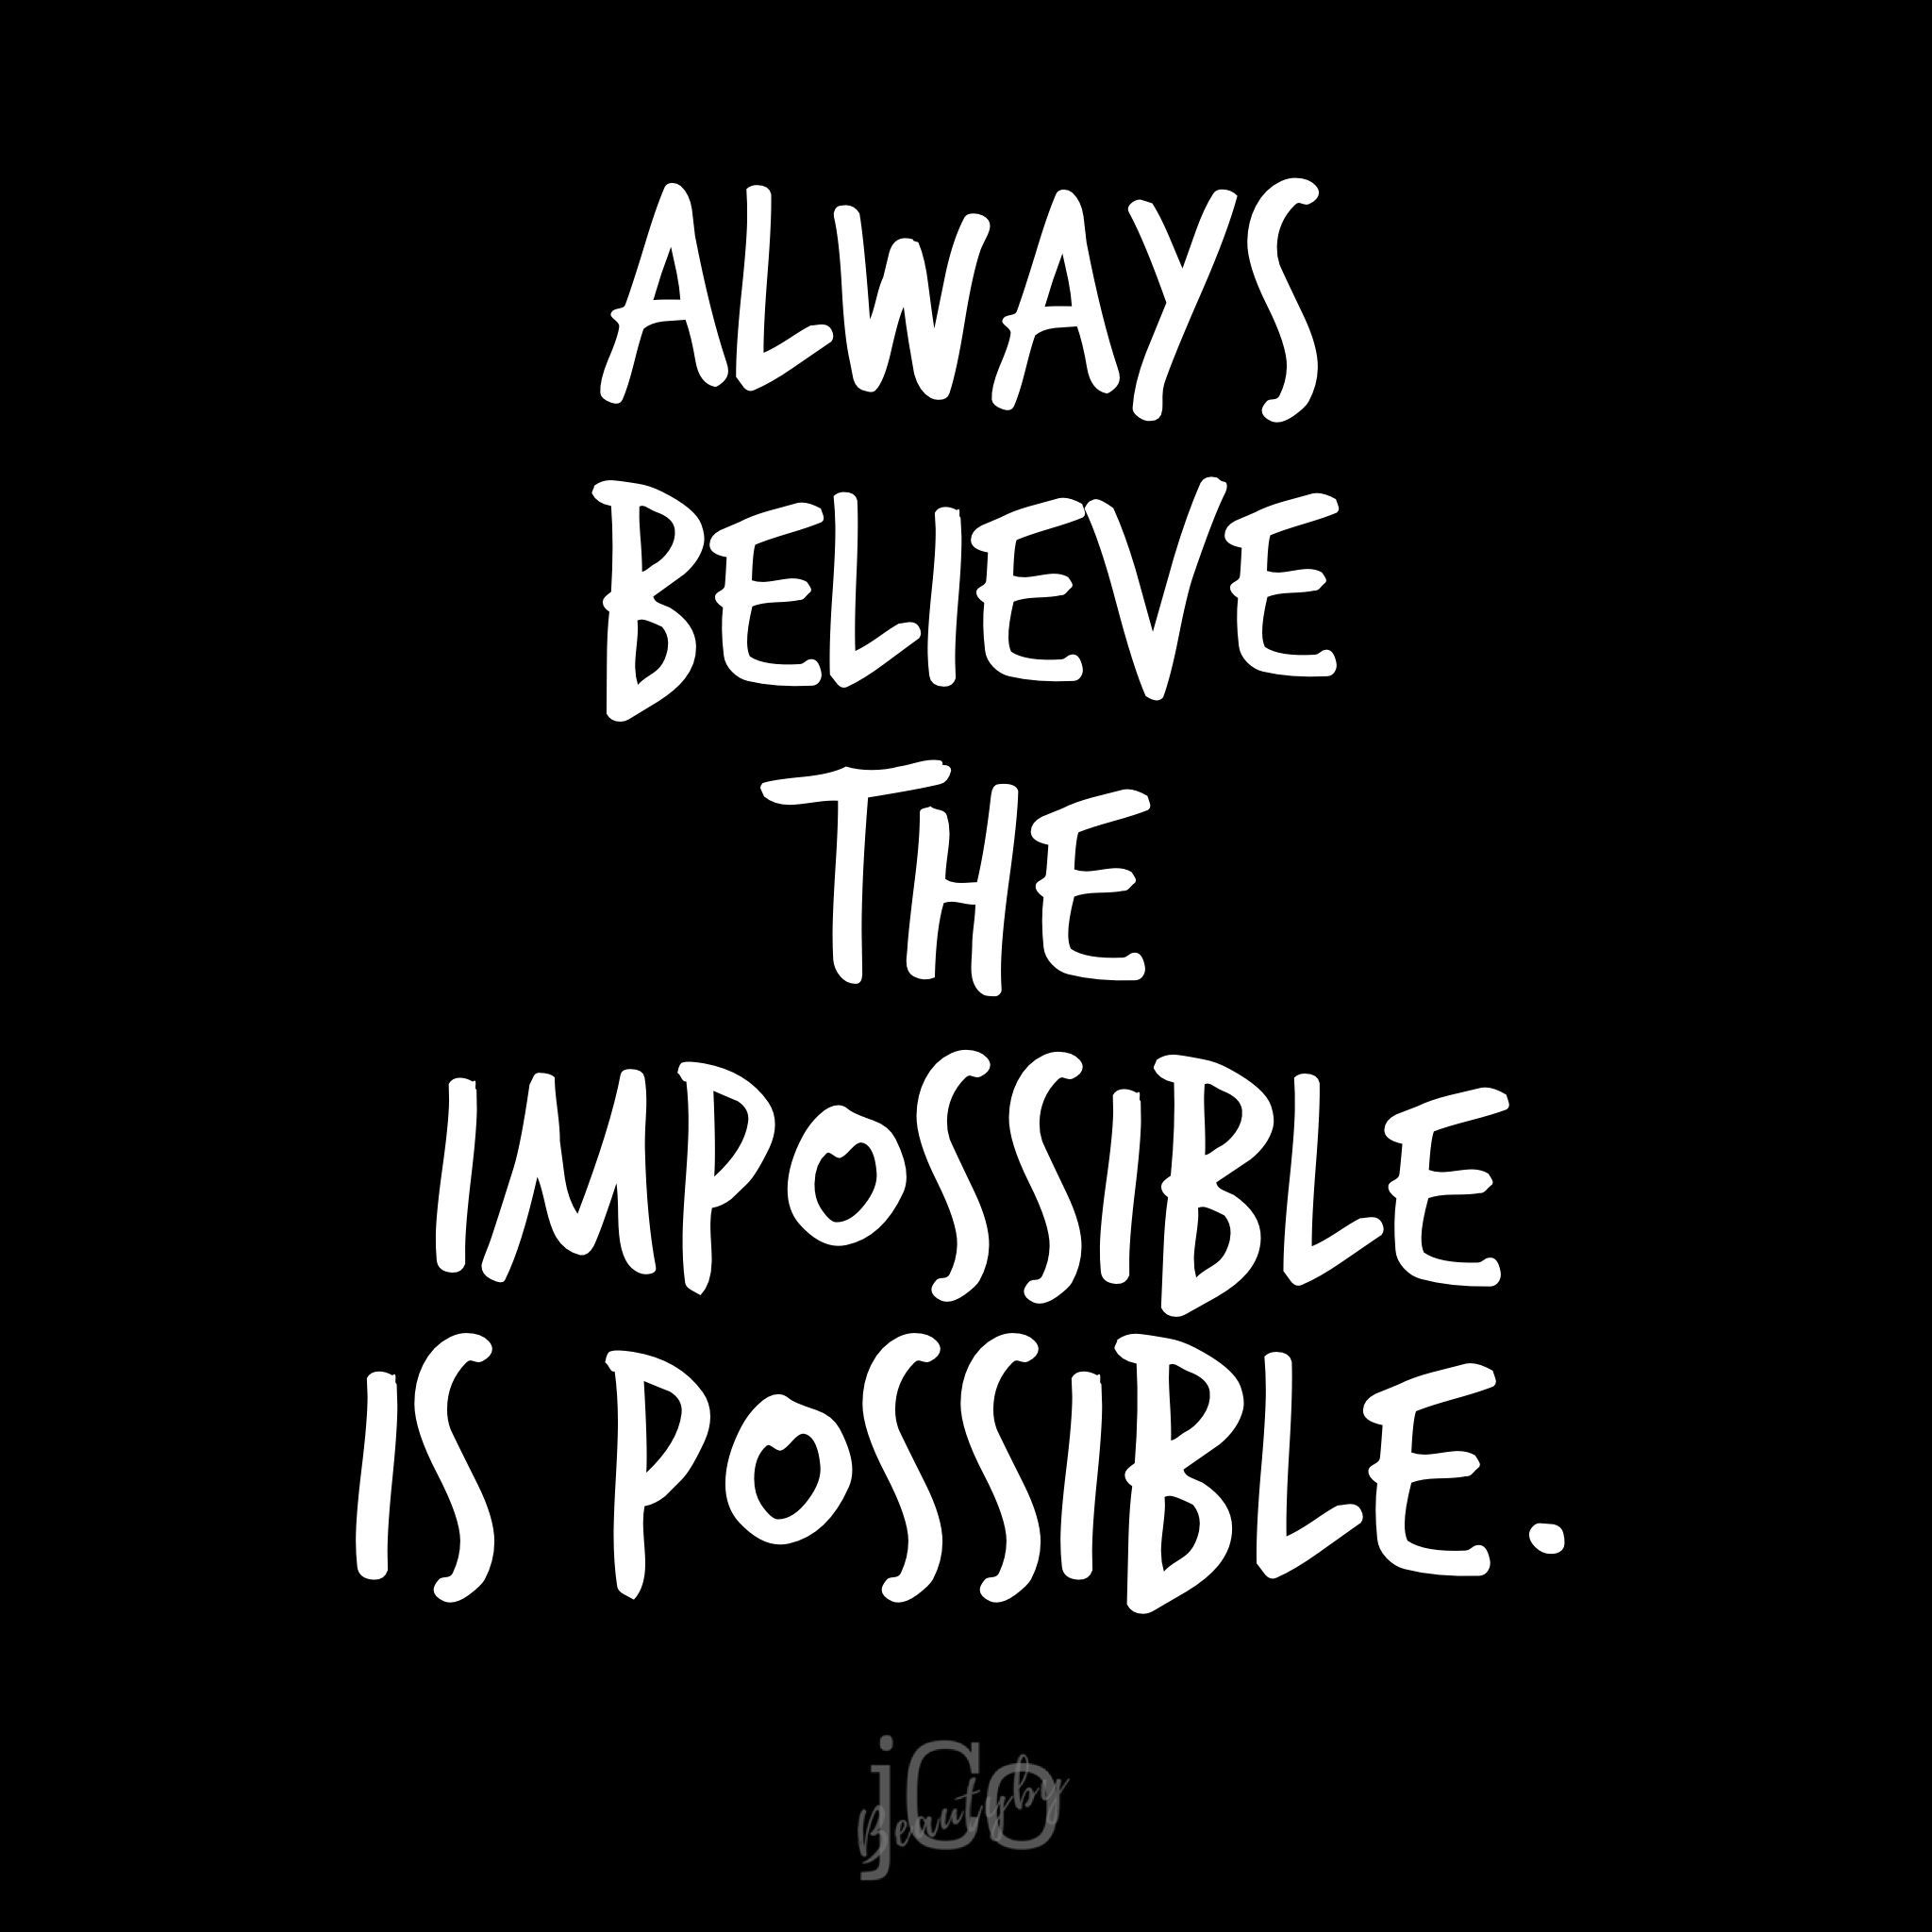 It's always possible. Impossible quotes, Possible quotes, Nothing is impossible quote